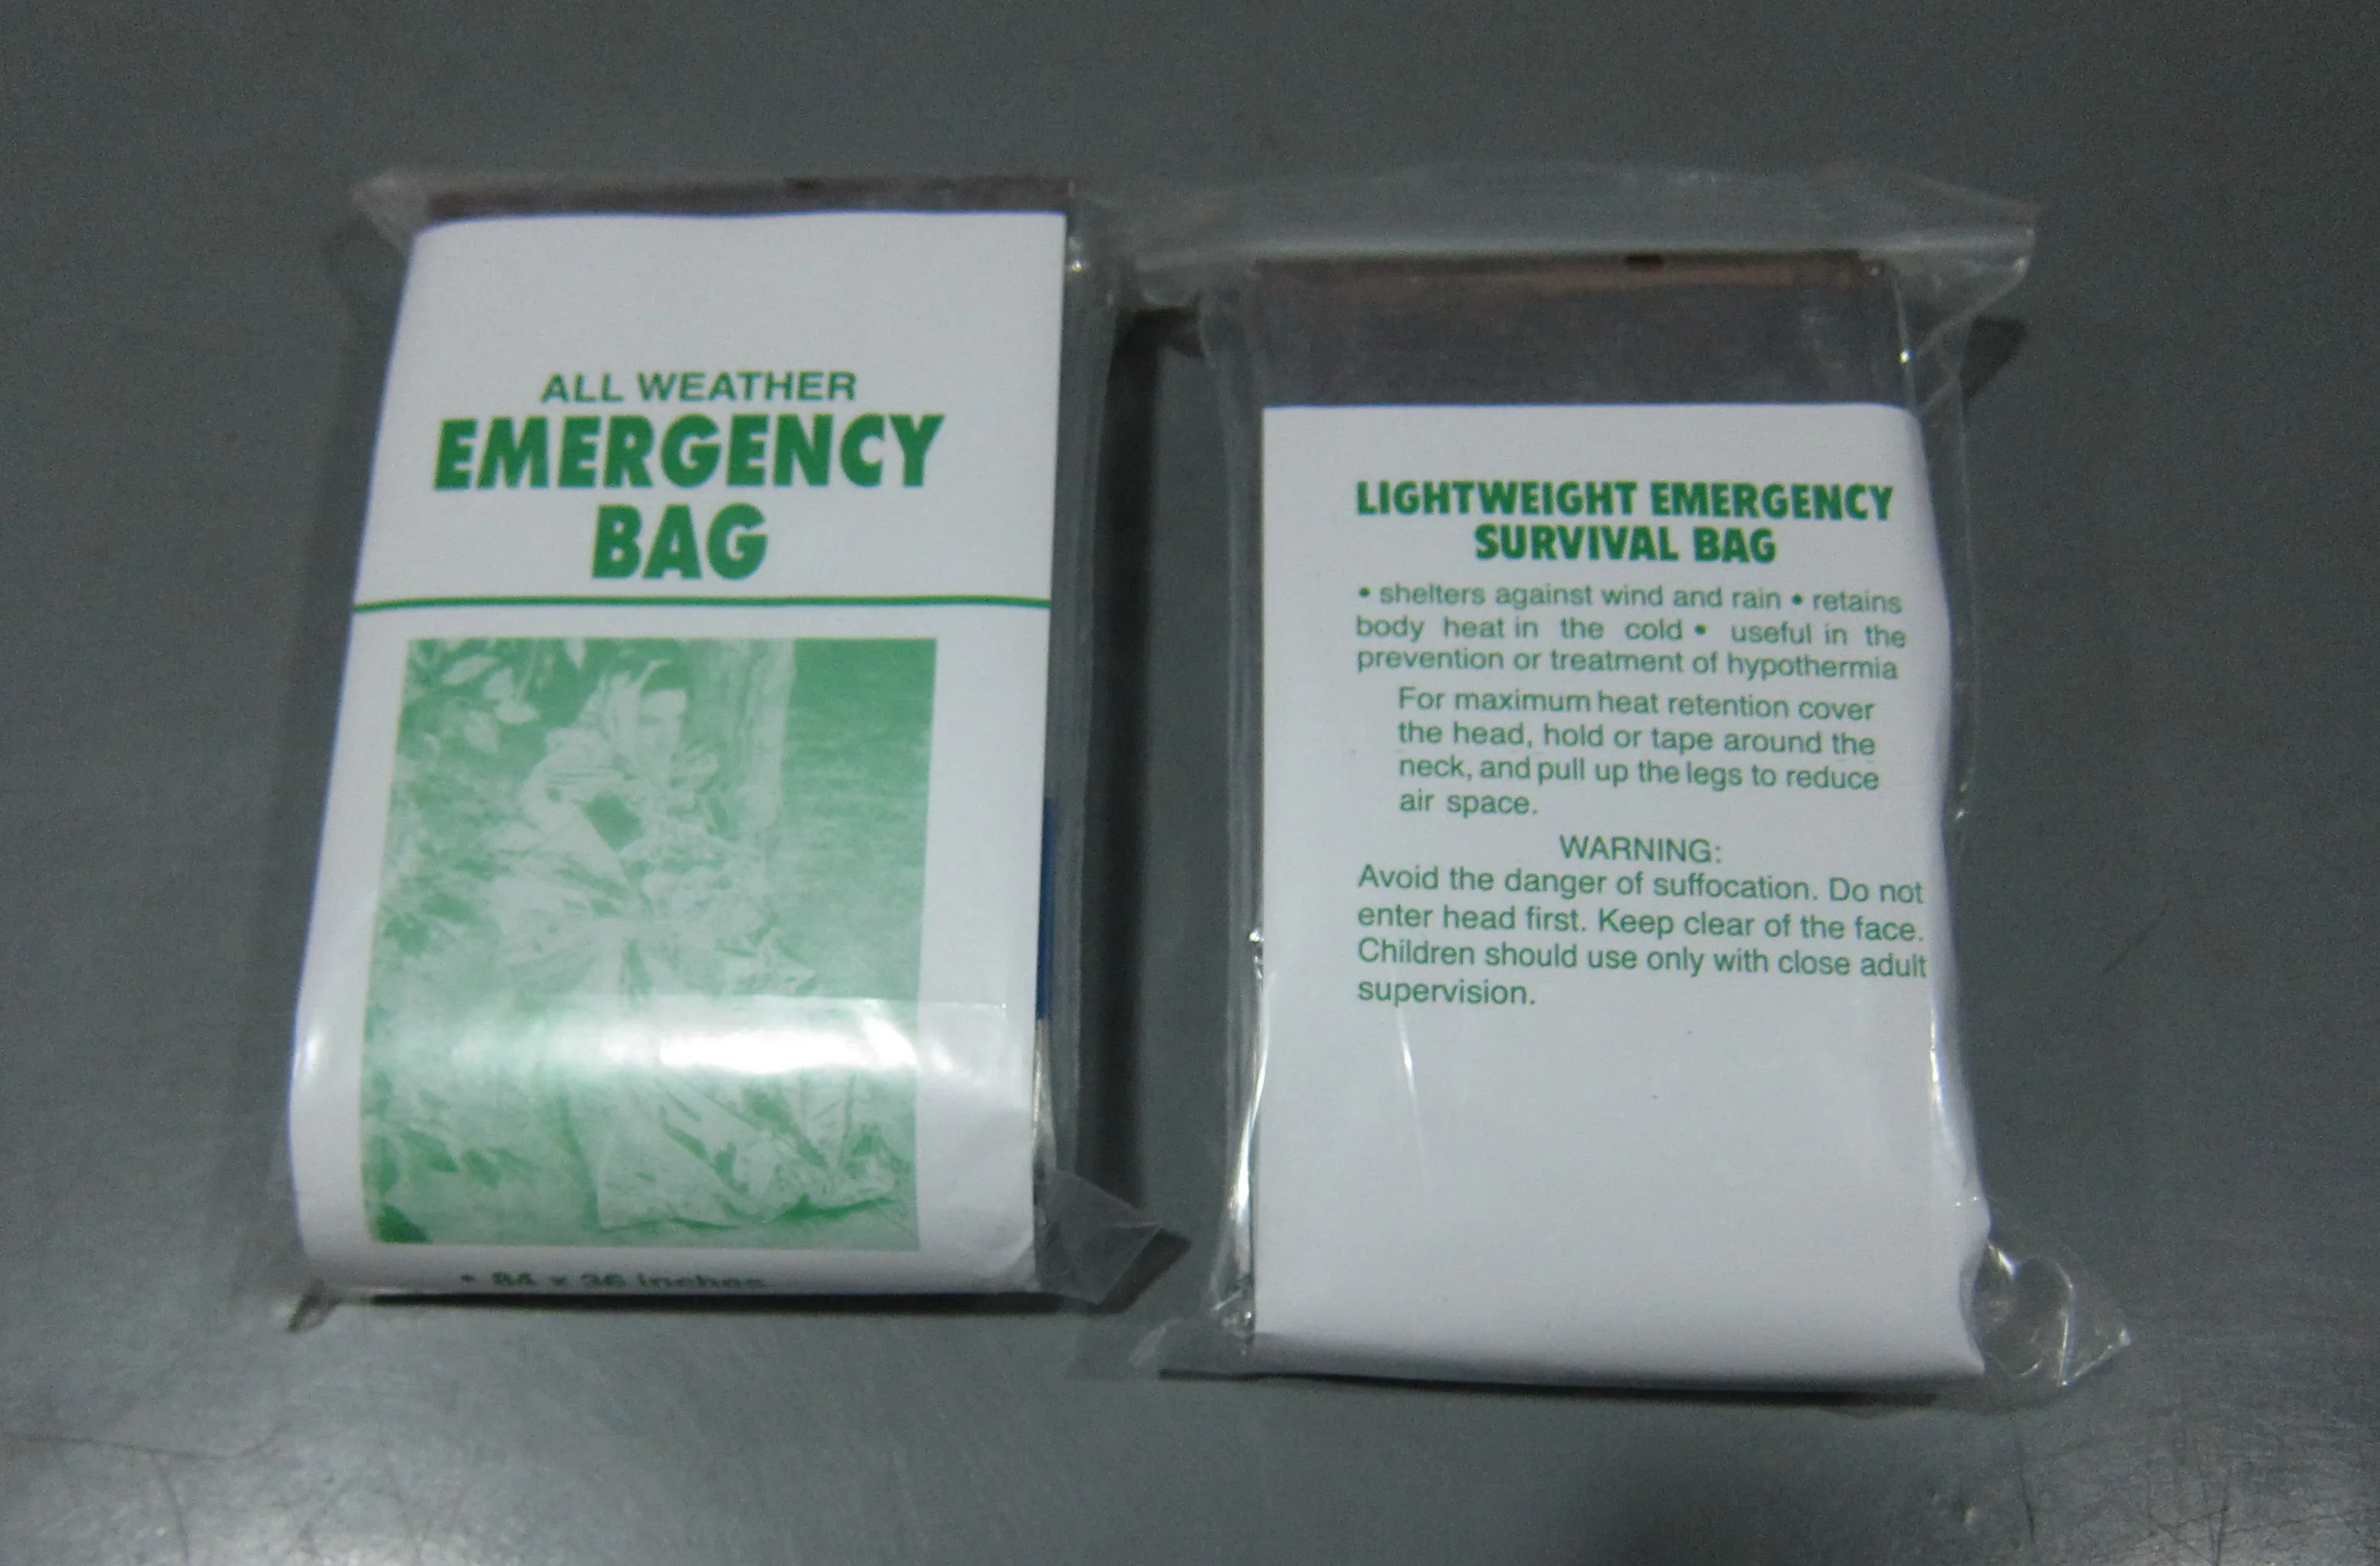 101 15 25. All weather Emergency Bag. All weather Emergency Bag 84x36 inches.